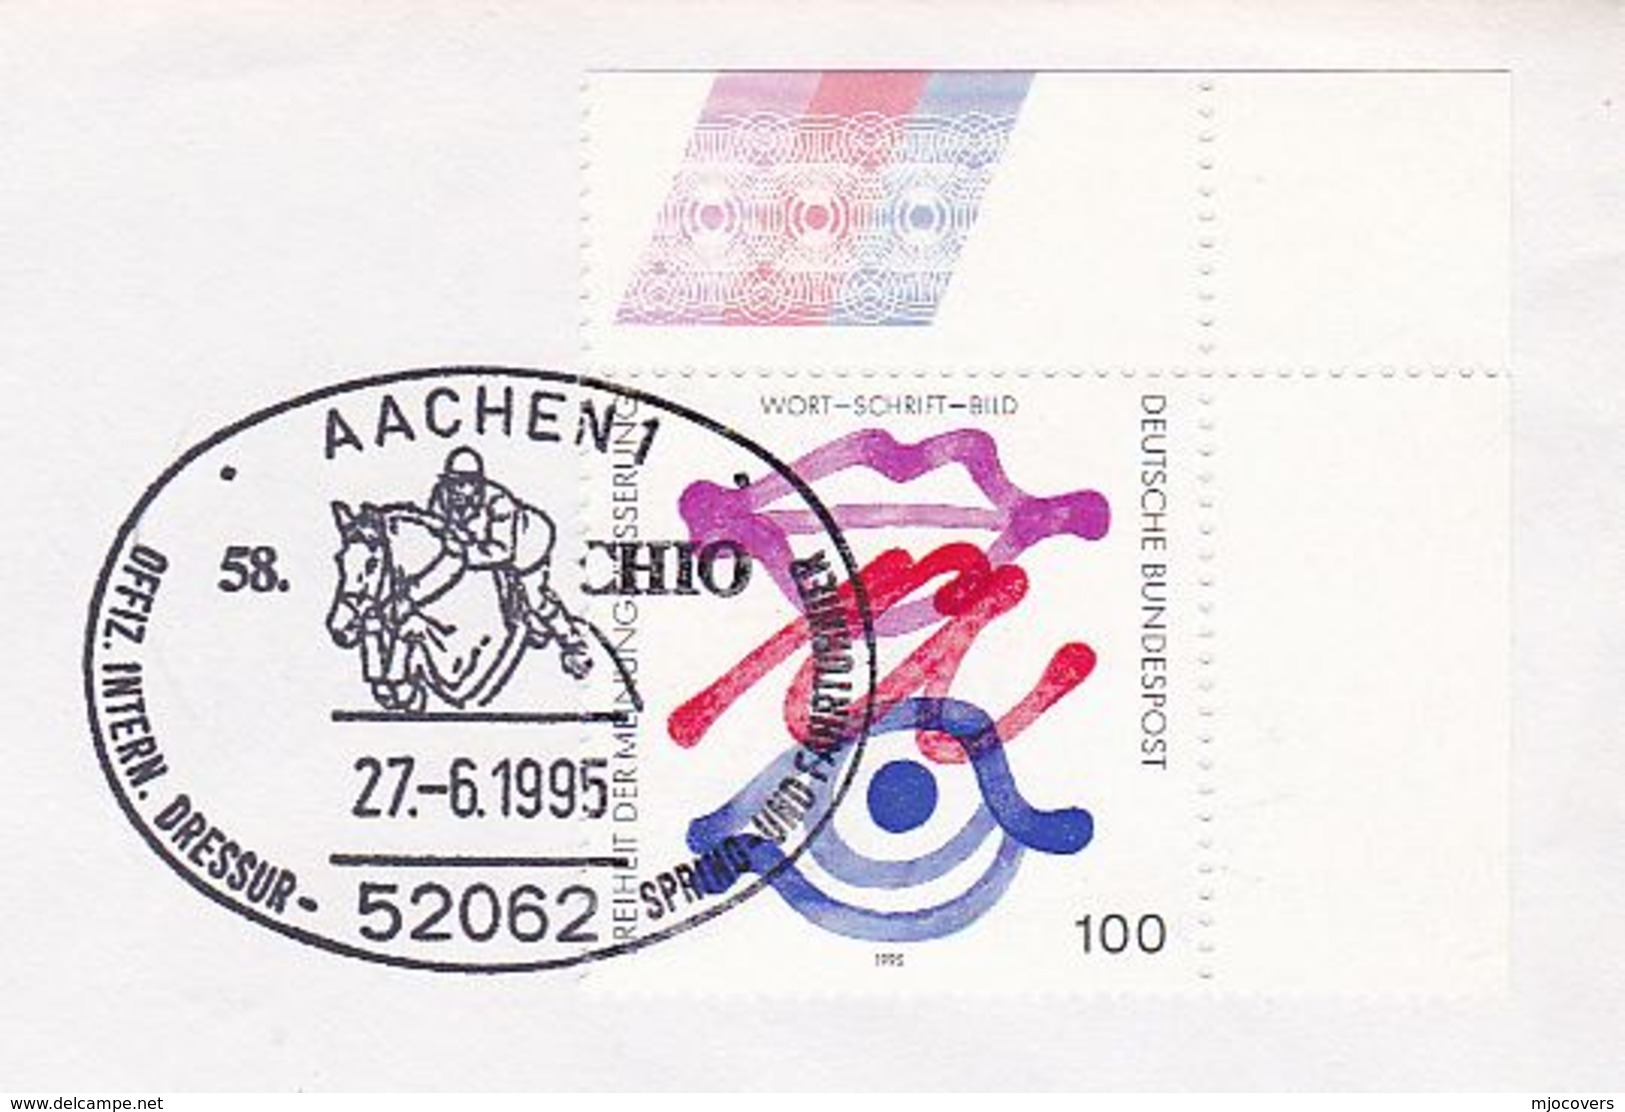 1995 Aachen, Germany COVER Chio DRESSAGE HORSE SHOWJUMPING EVENT Pmk Horses Sport Stamps - Reitsport